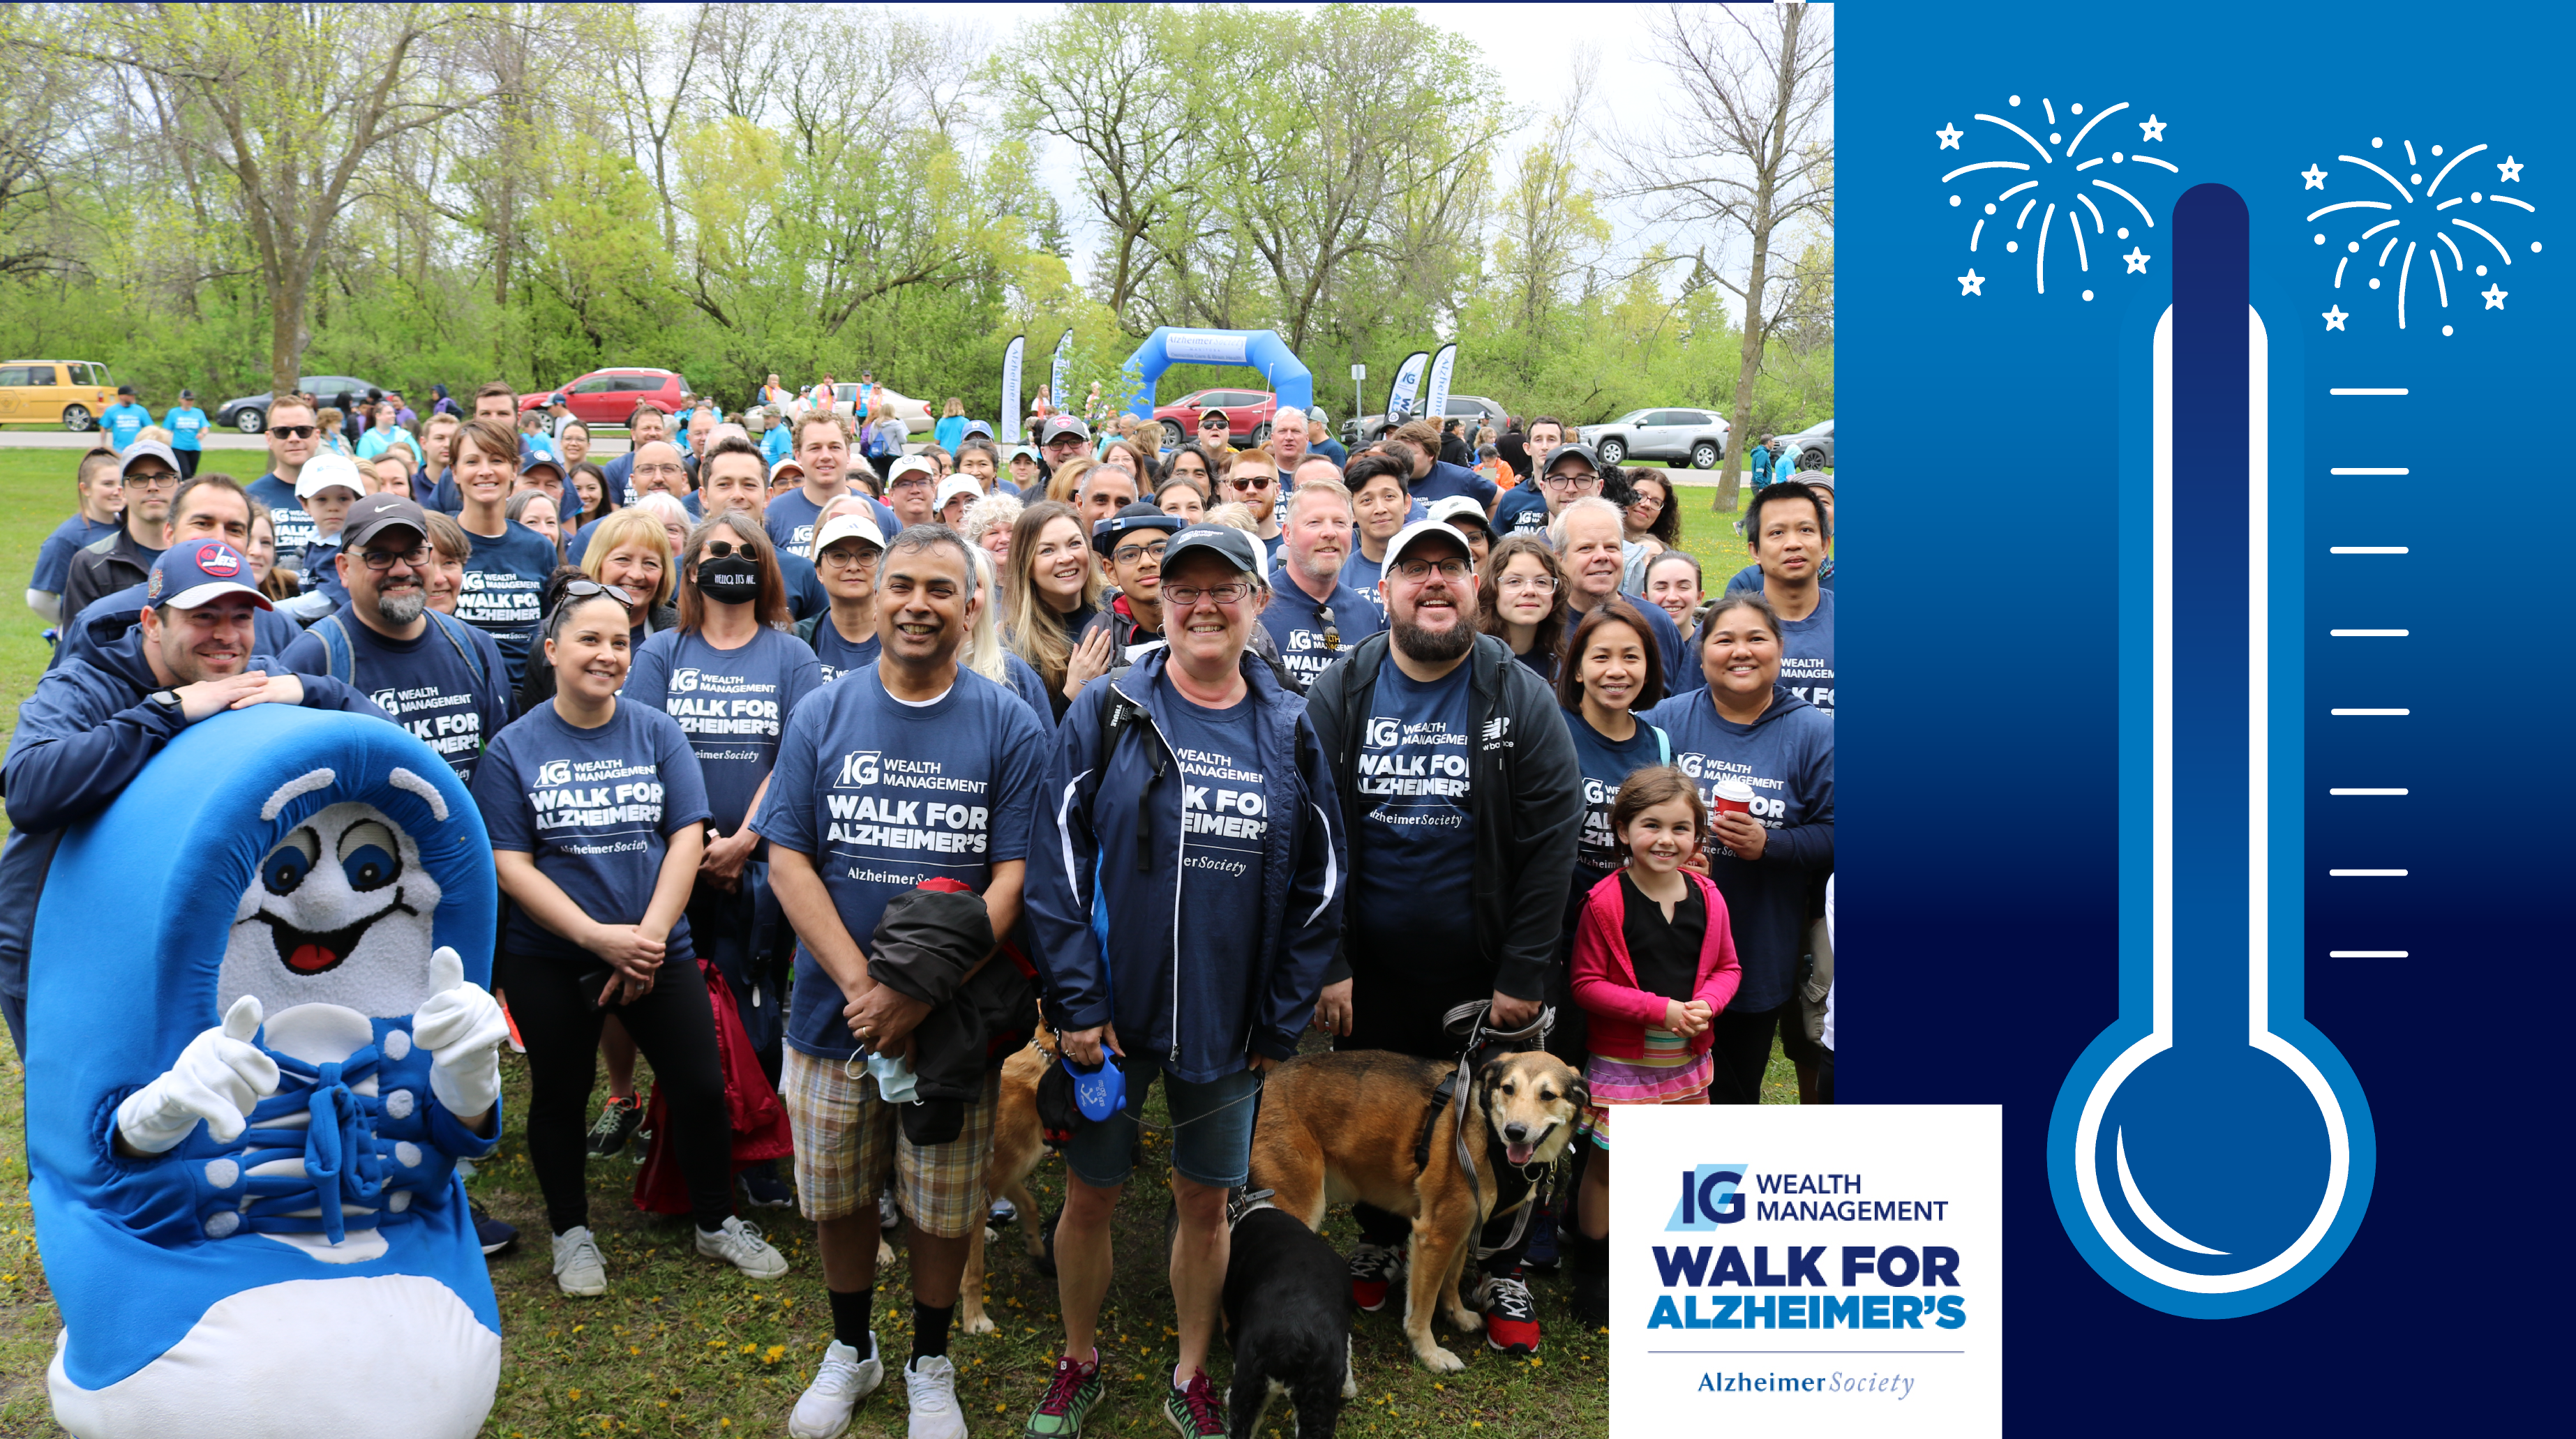 Group of participants celebrating a successful IG Wealth Management Walk for Alzheimer's!